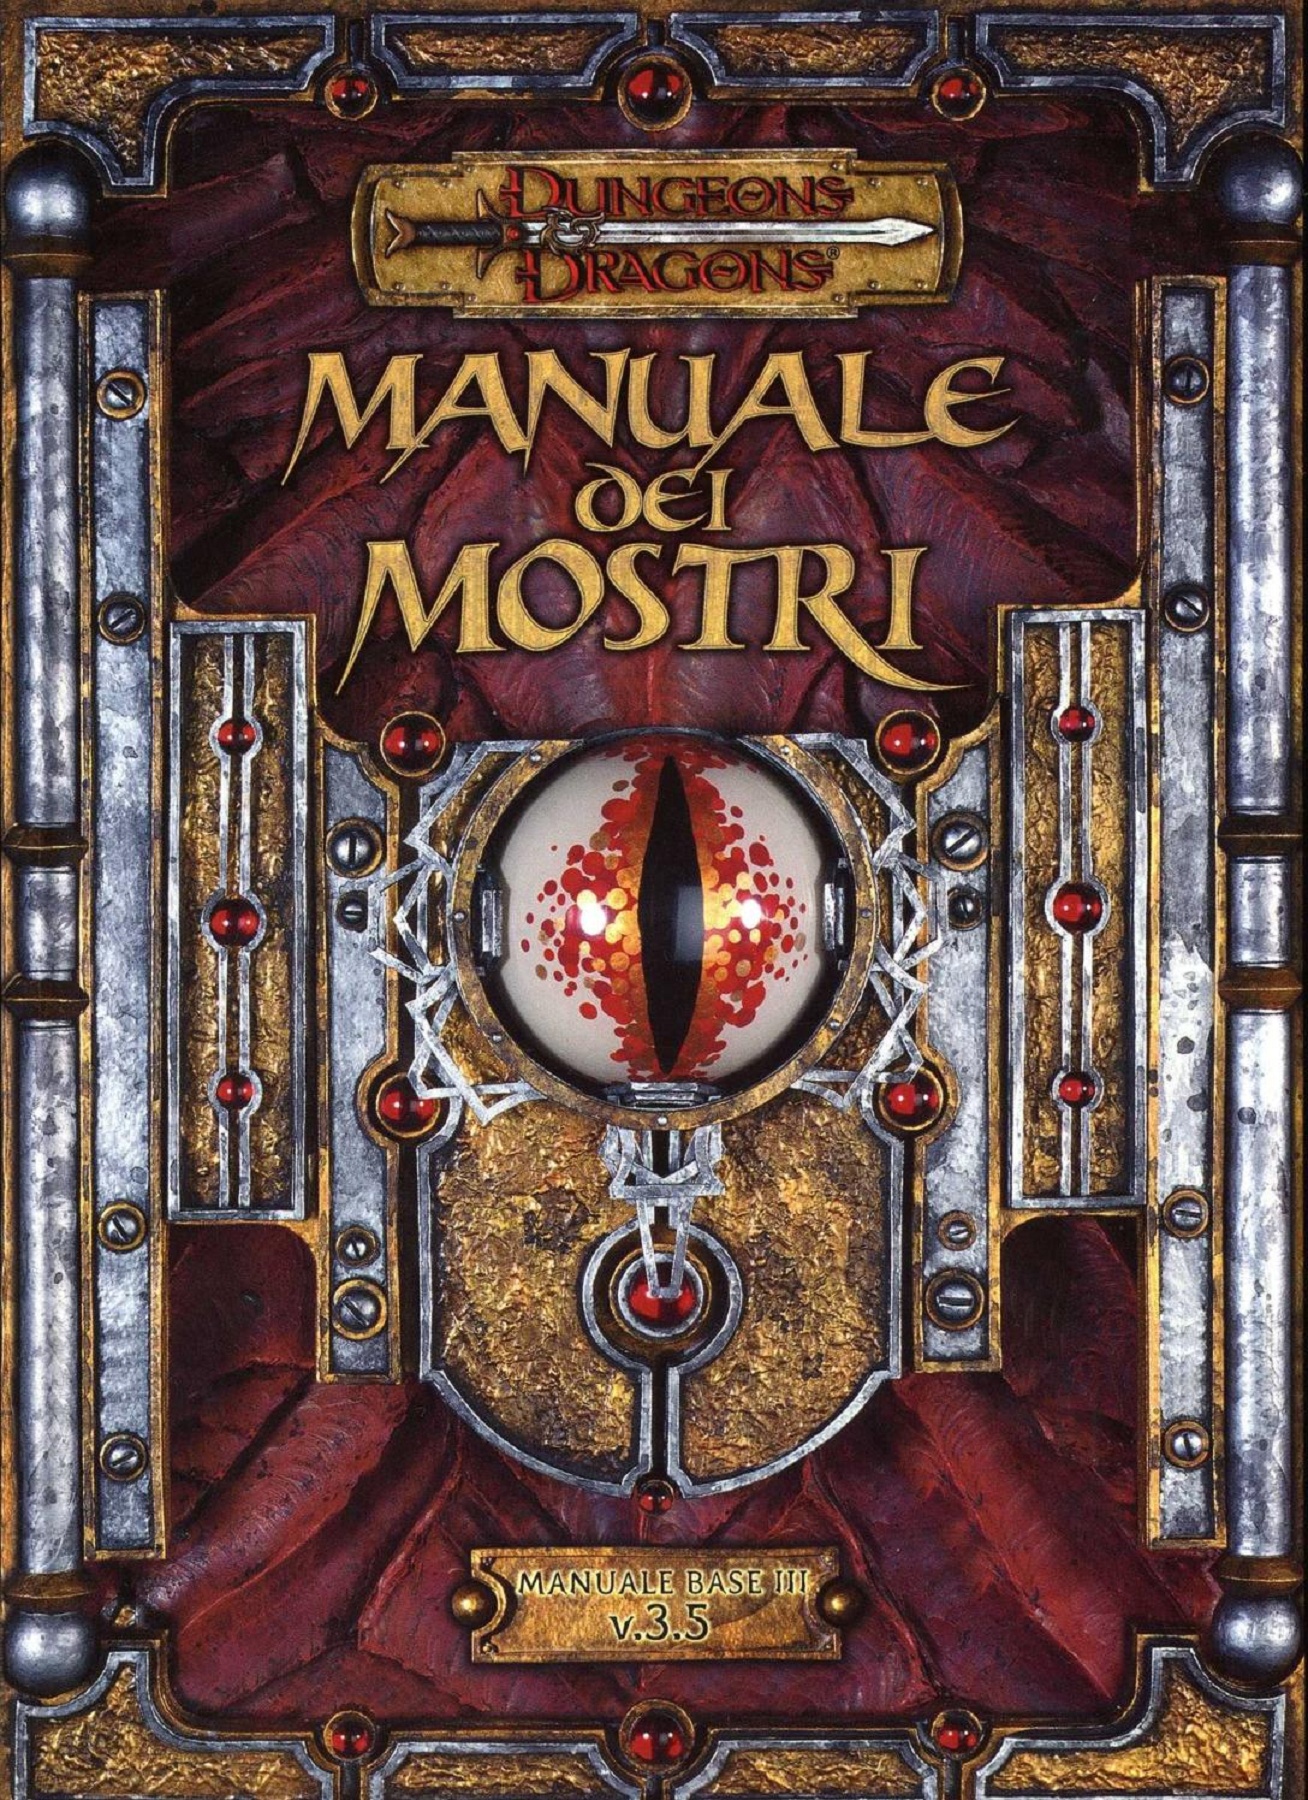 Manuale dei Mostri (3.5), Dungeons and Dragons Wiki